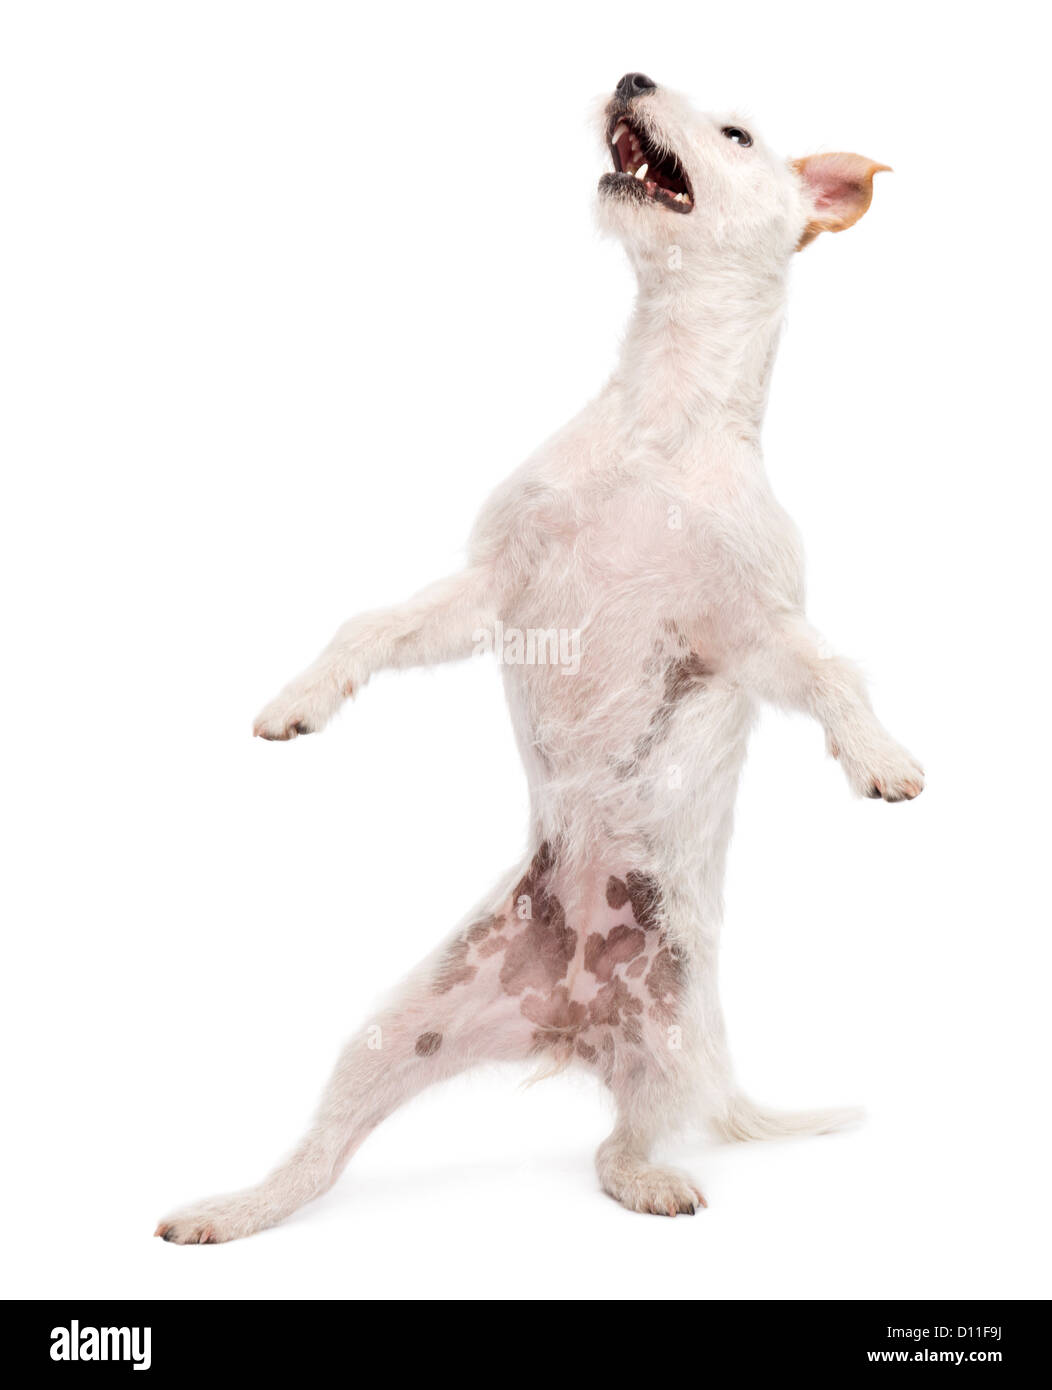 Parson Russell Terrier on hind legs against white background Stock Photo